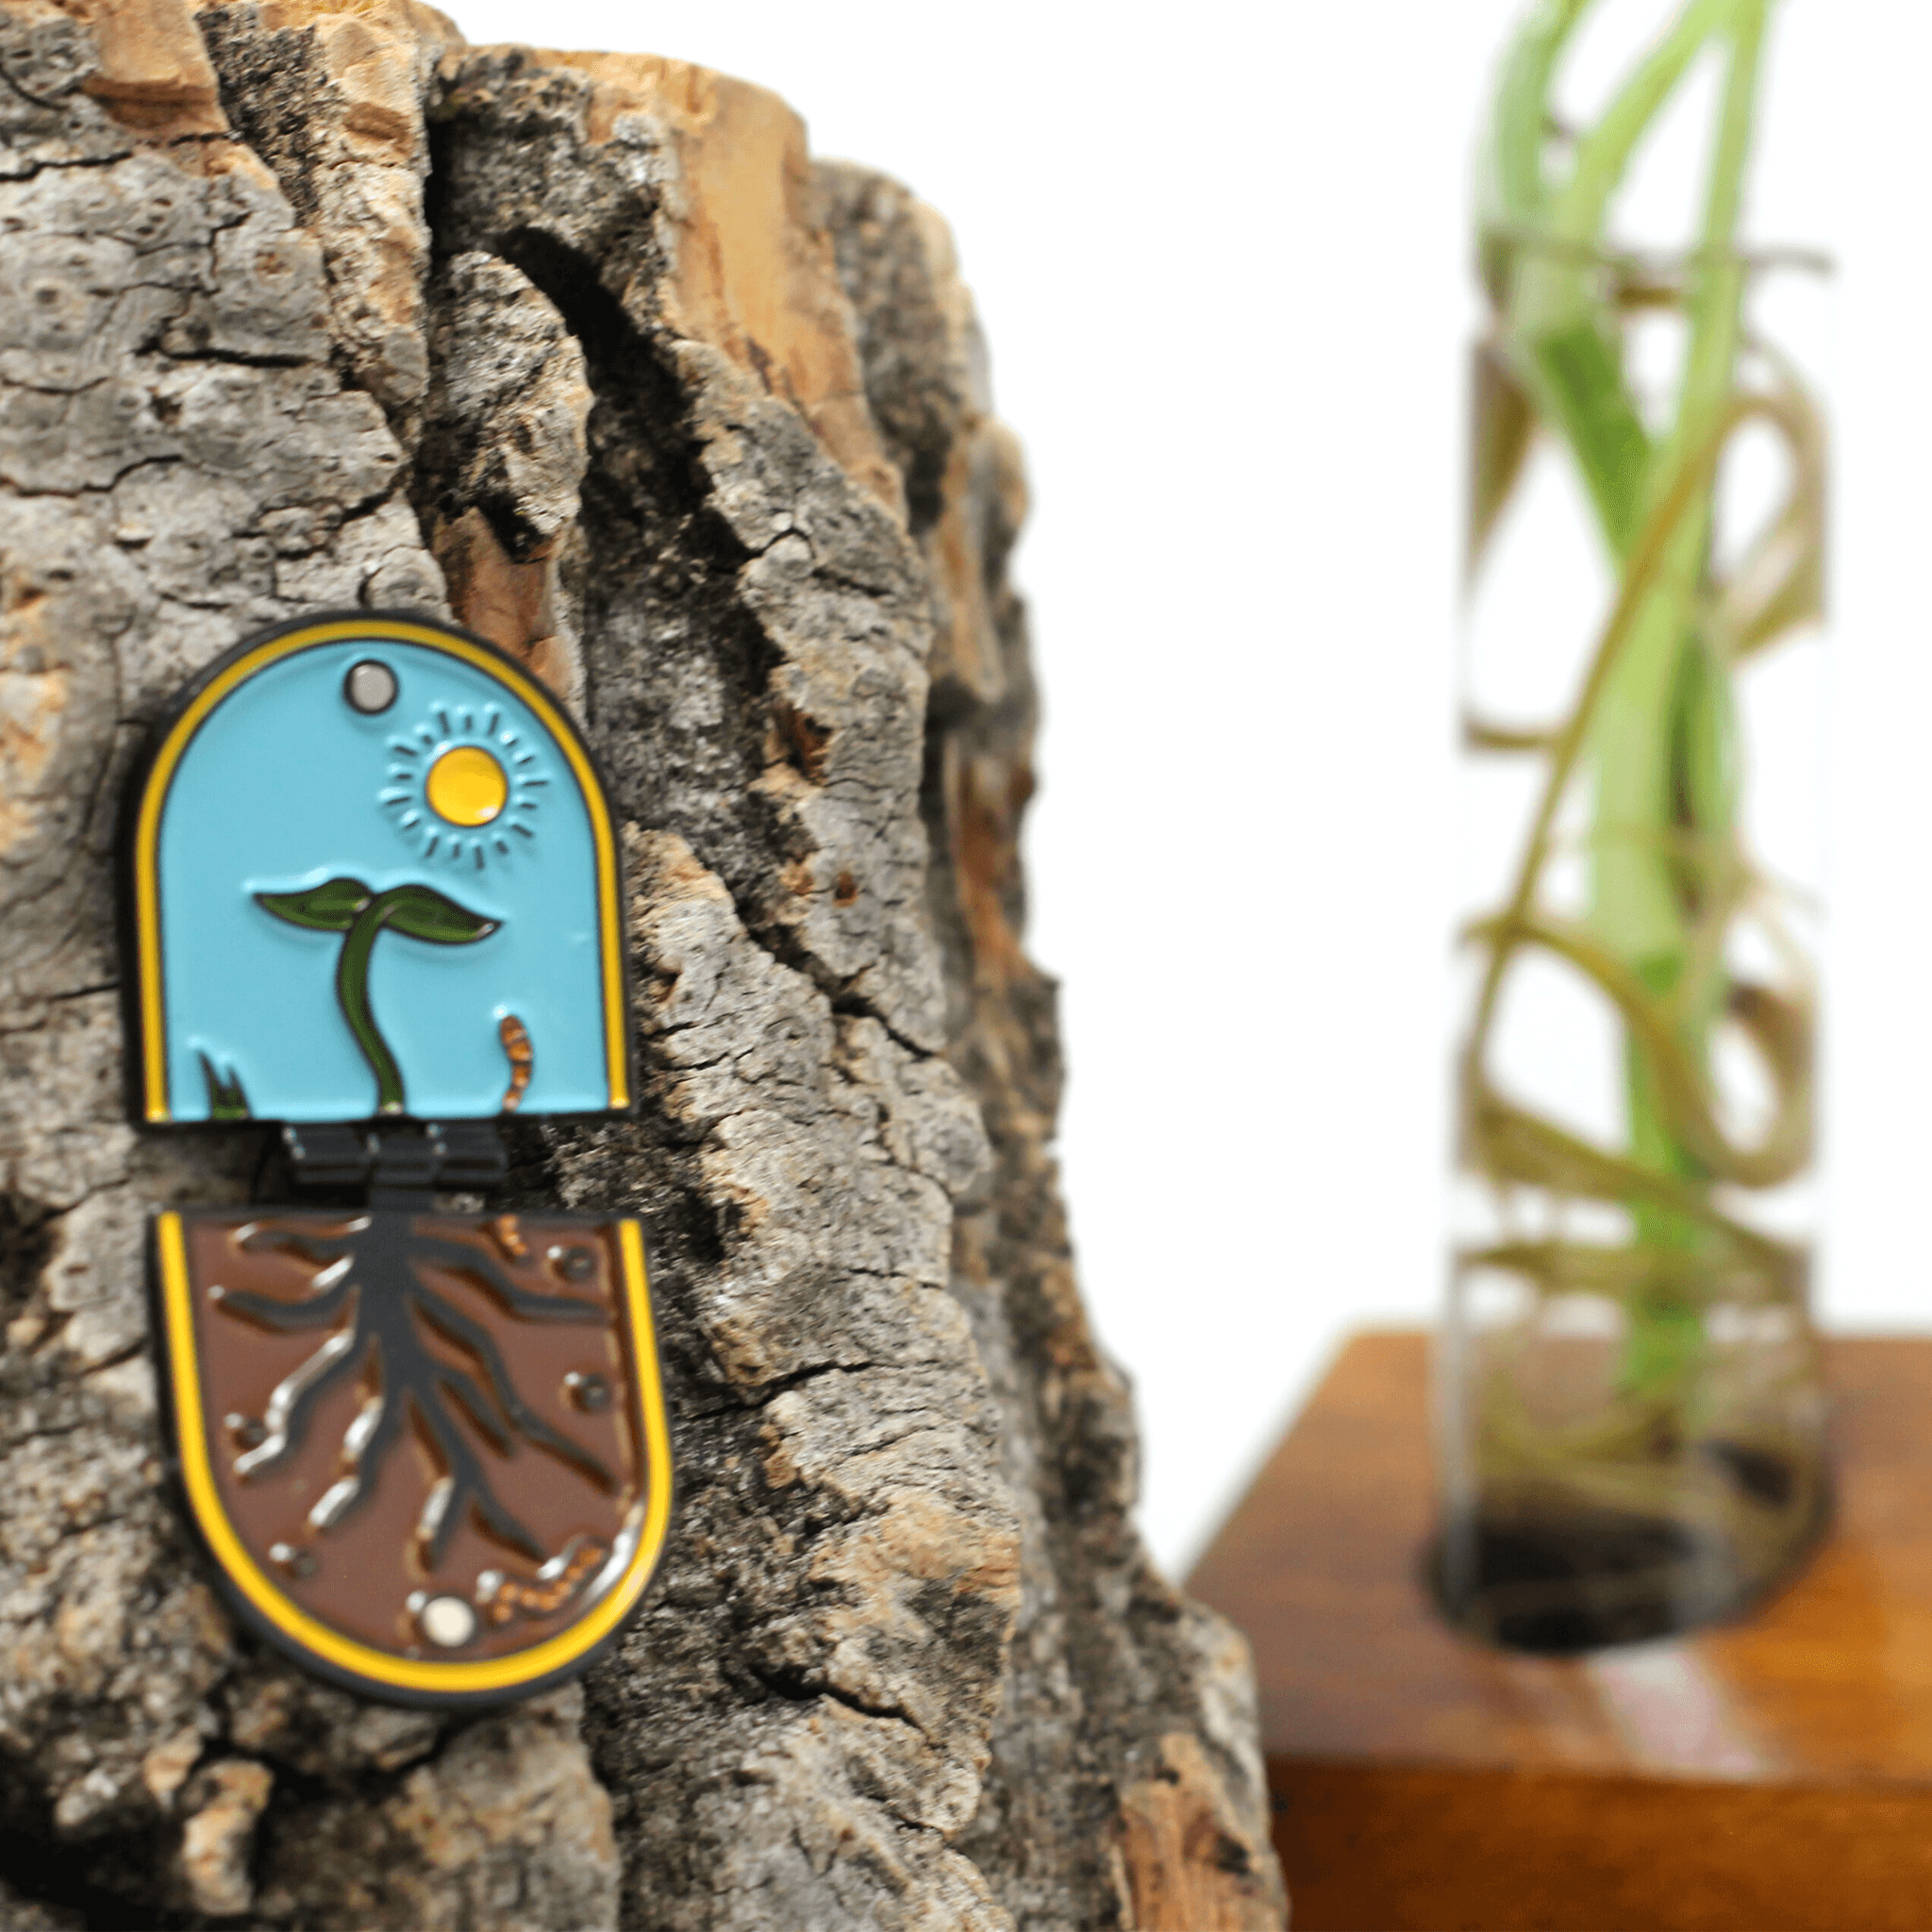 Enamel Pins - ALIVE Outdoors